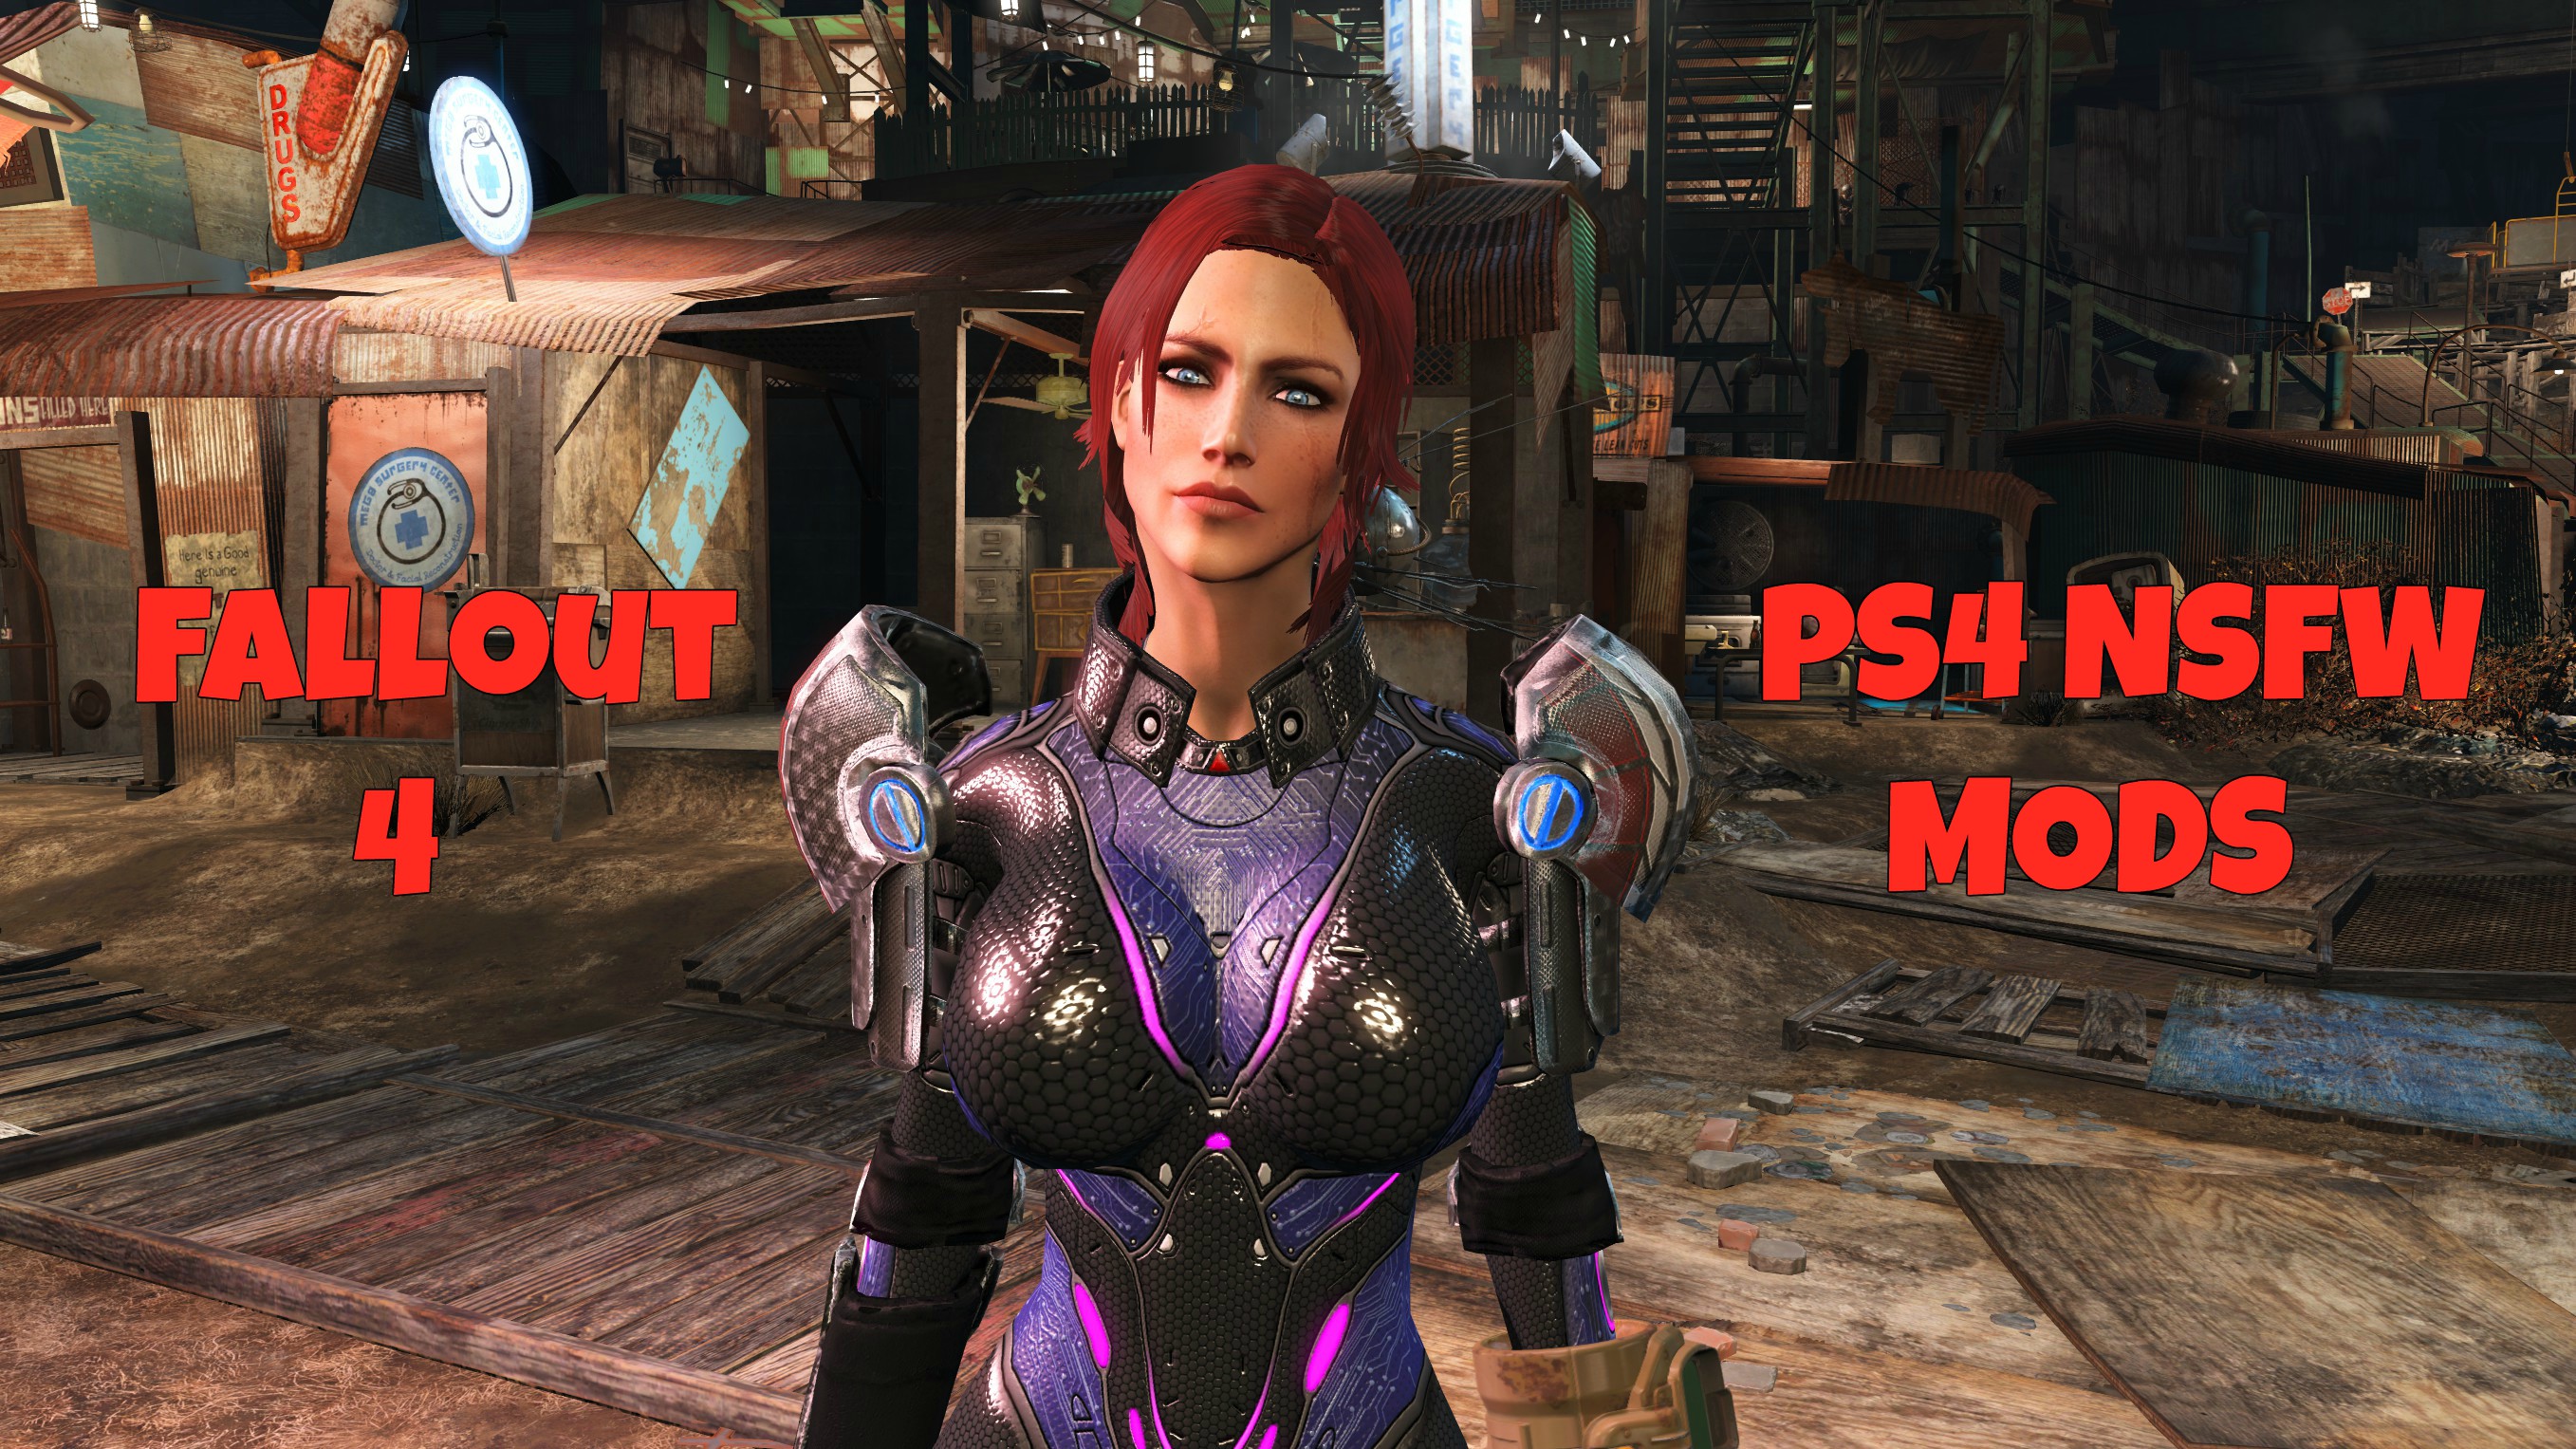 Fallout 4 PS4 Nude/NSFW Mods a look at the limited options available